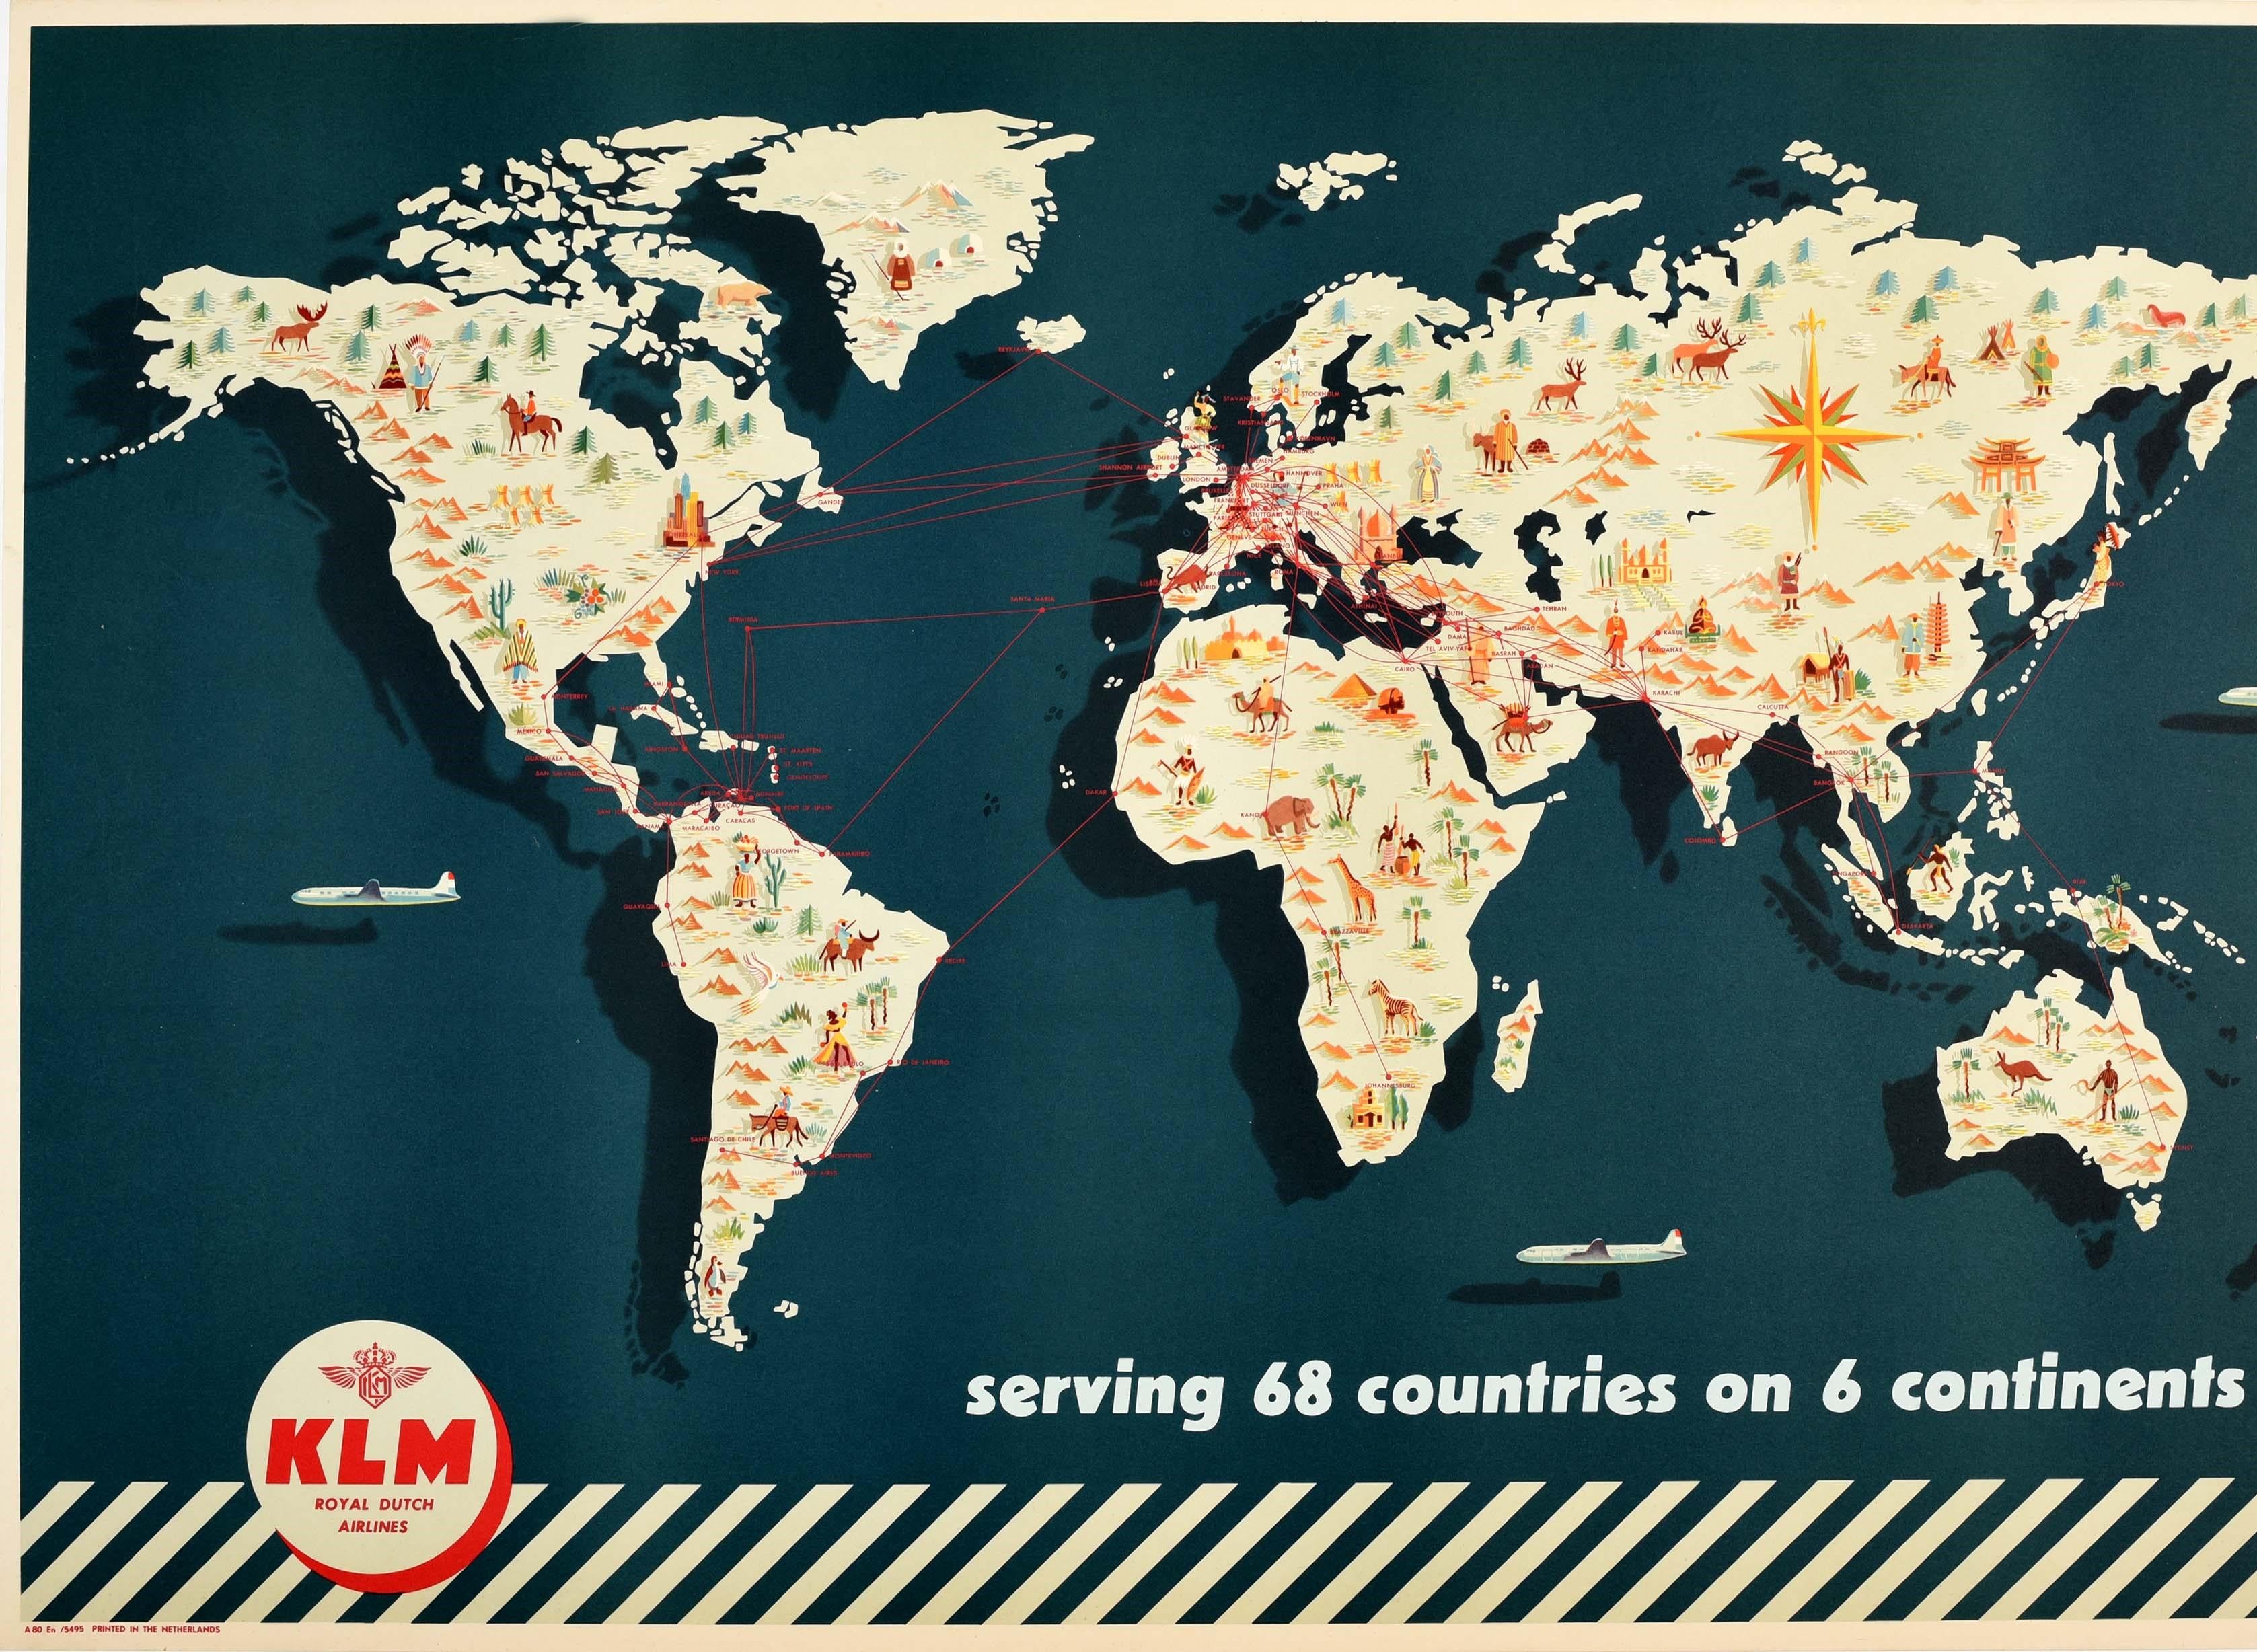 Original vintage travel map poster advertising KLM Royal Dutch Airlines serving 68 countries on 6 continents featuring a pictorial map of the world depicting people, mountains and animals with stylised planes flying overhead, all creating shadows on